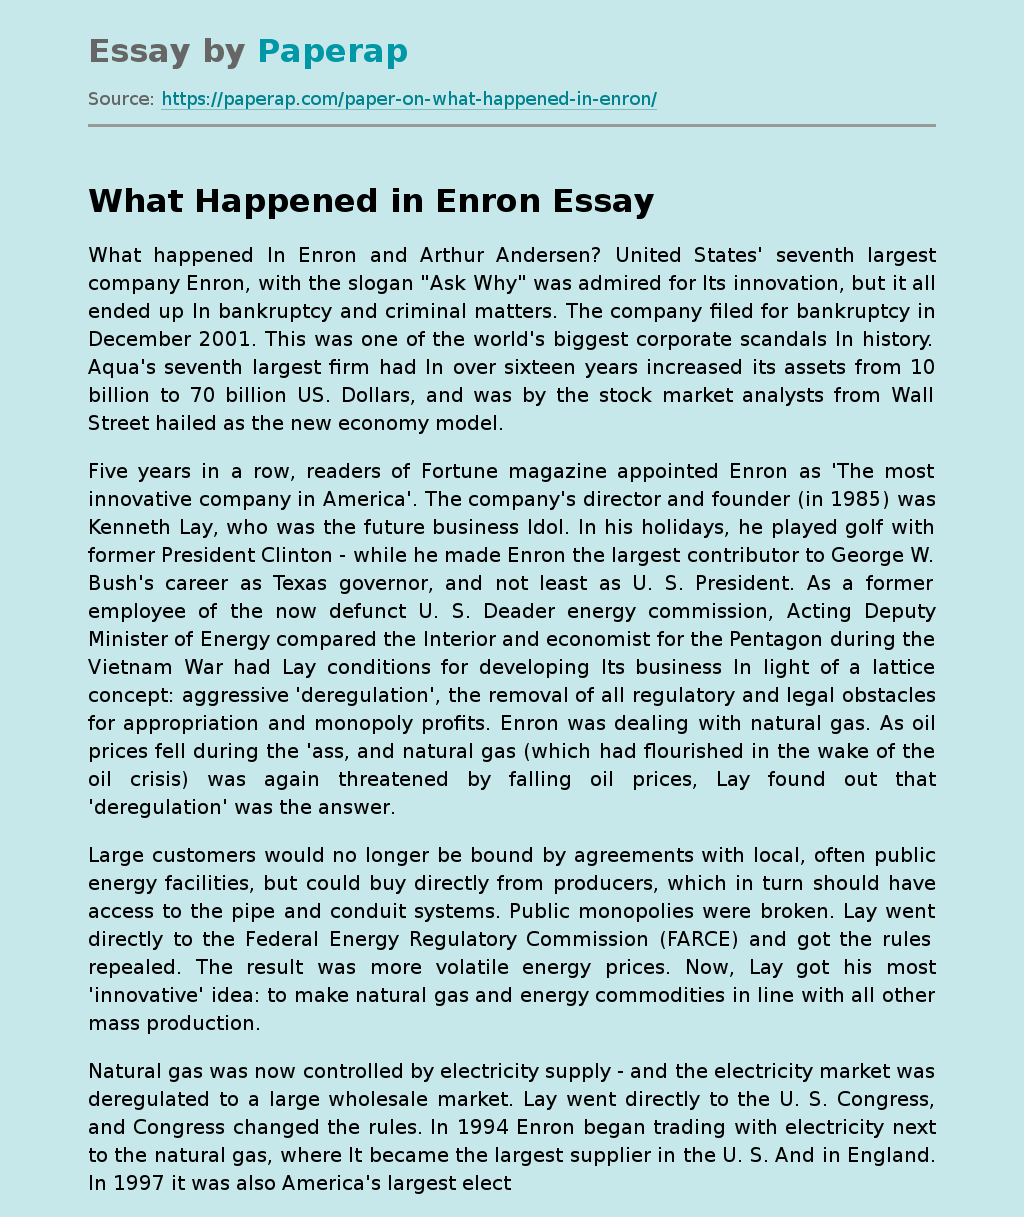 What Happened in Enron